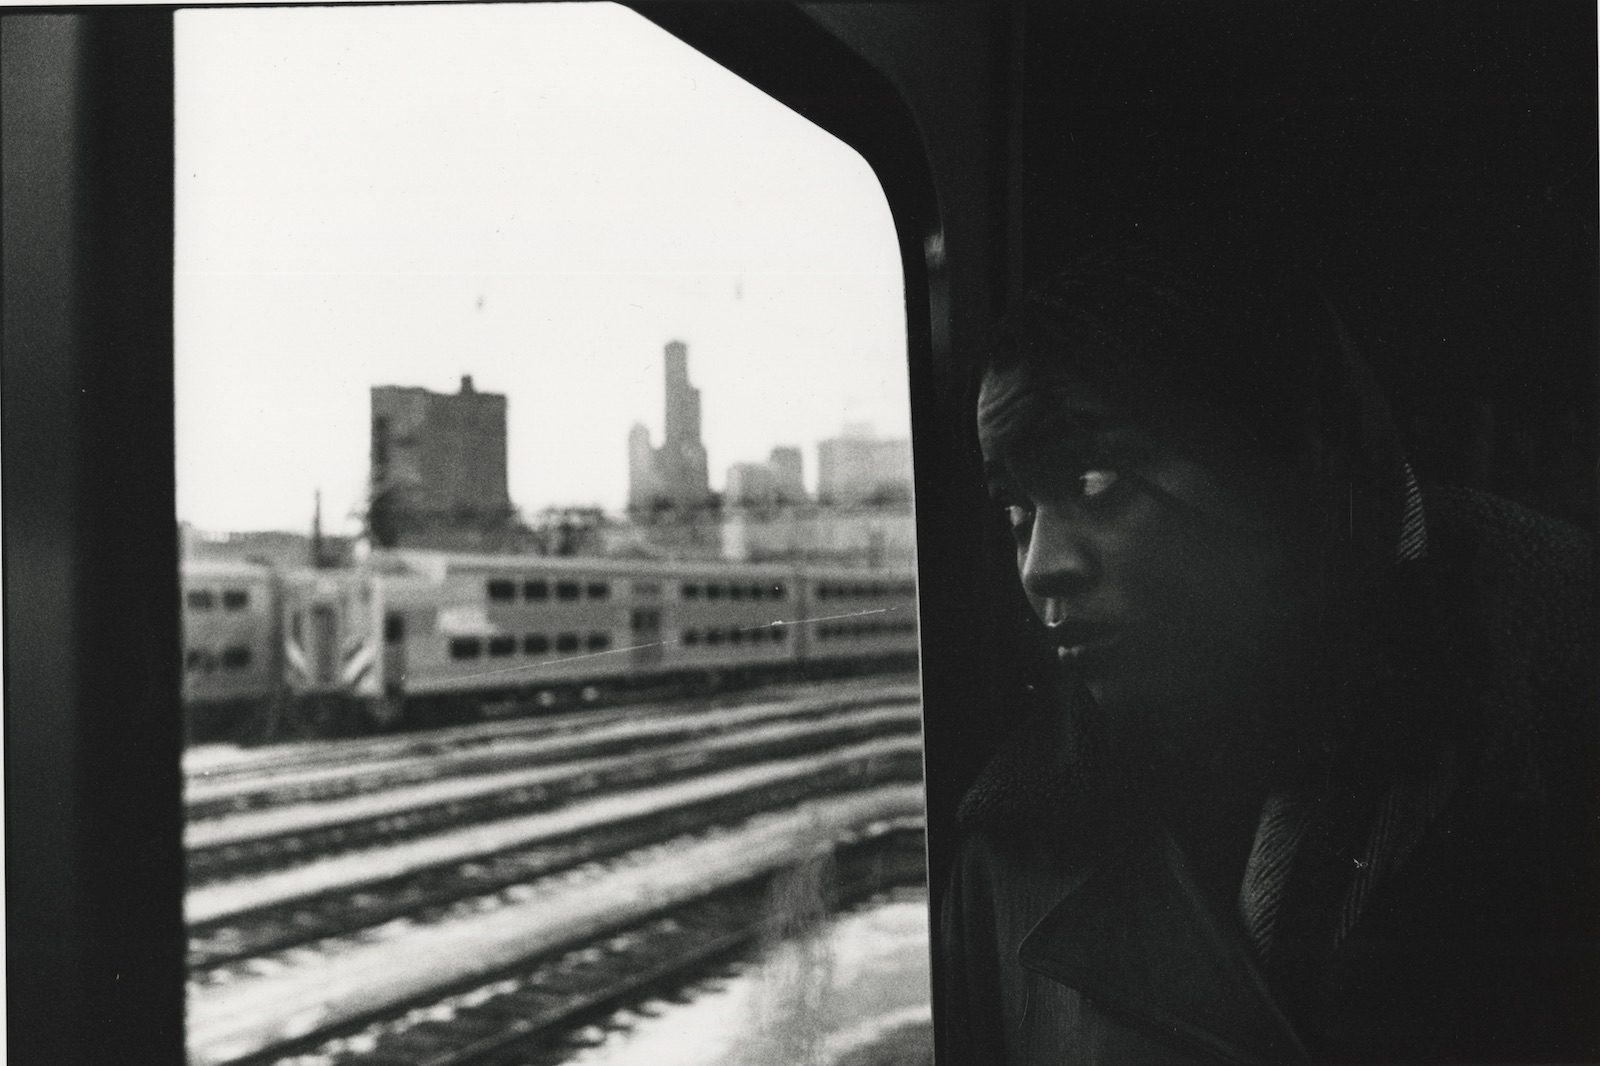 Woman on the train, Southside Chicago, 1995